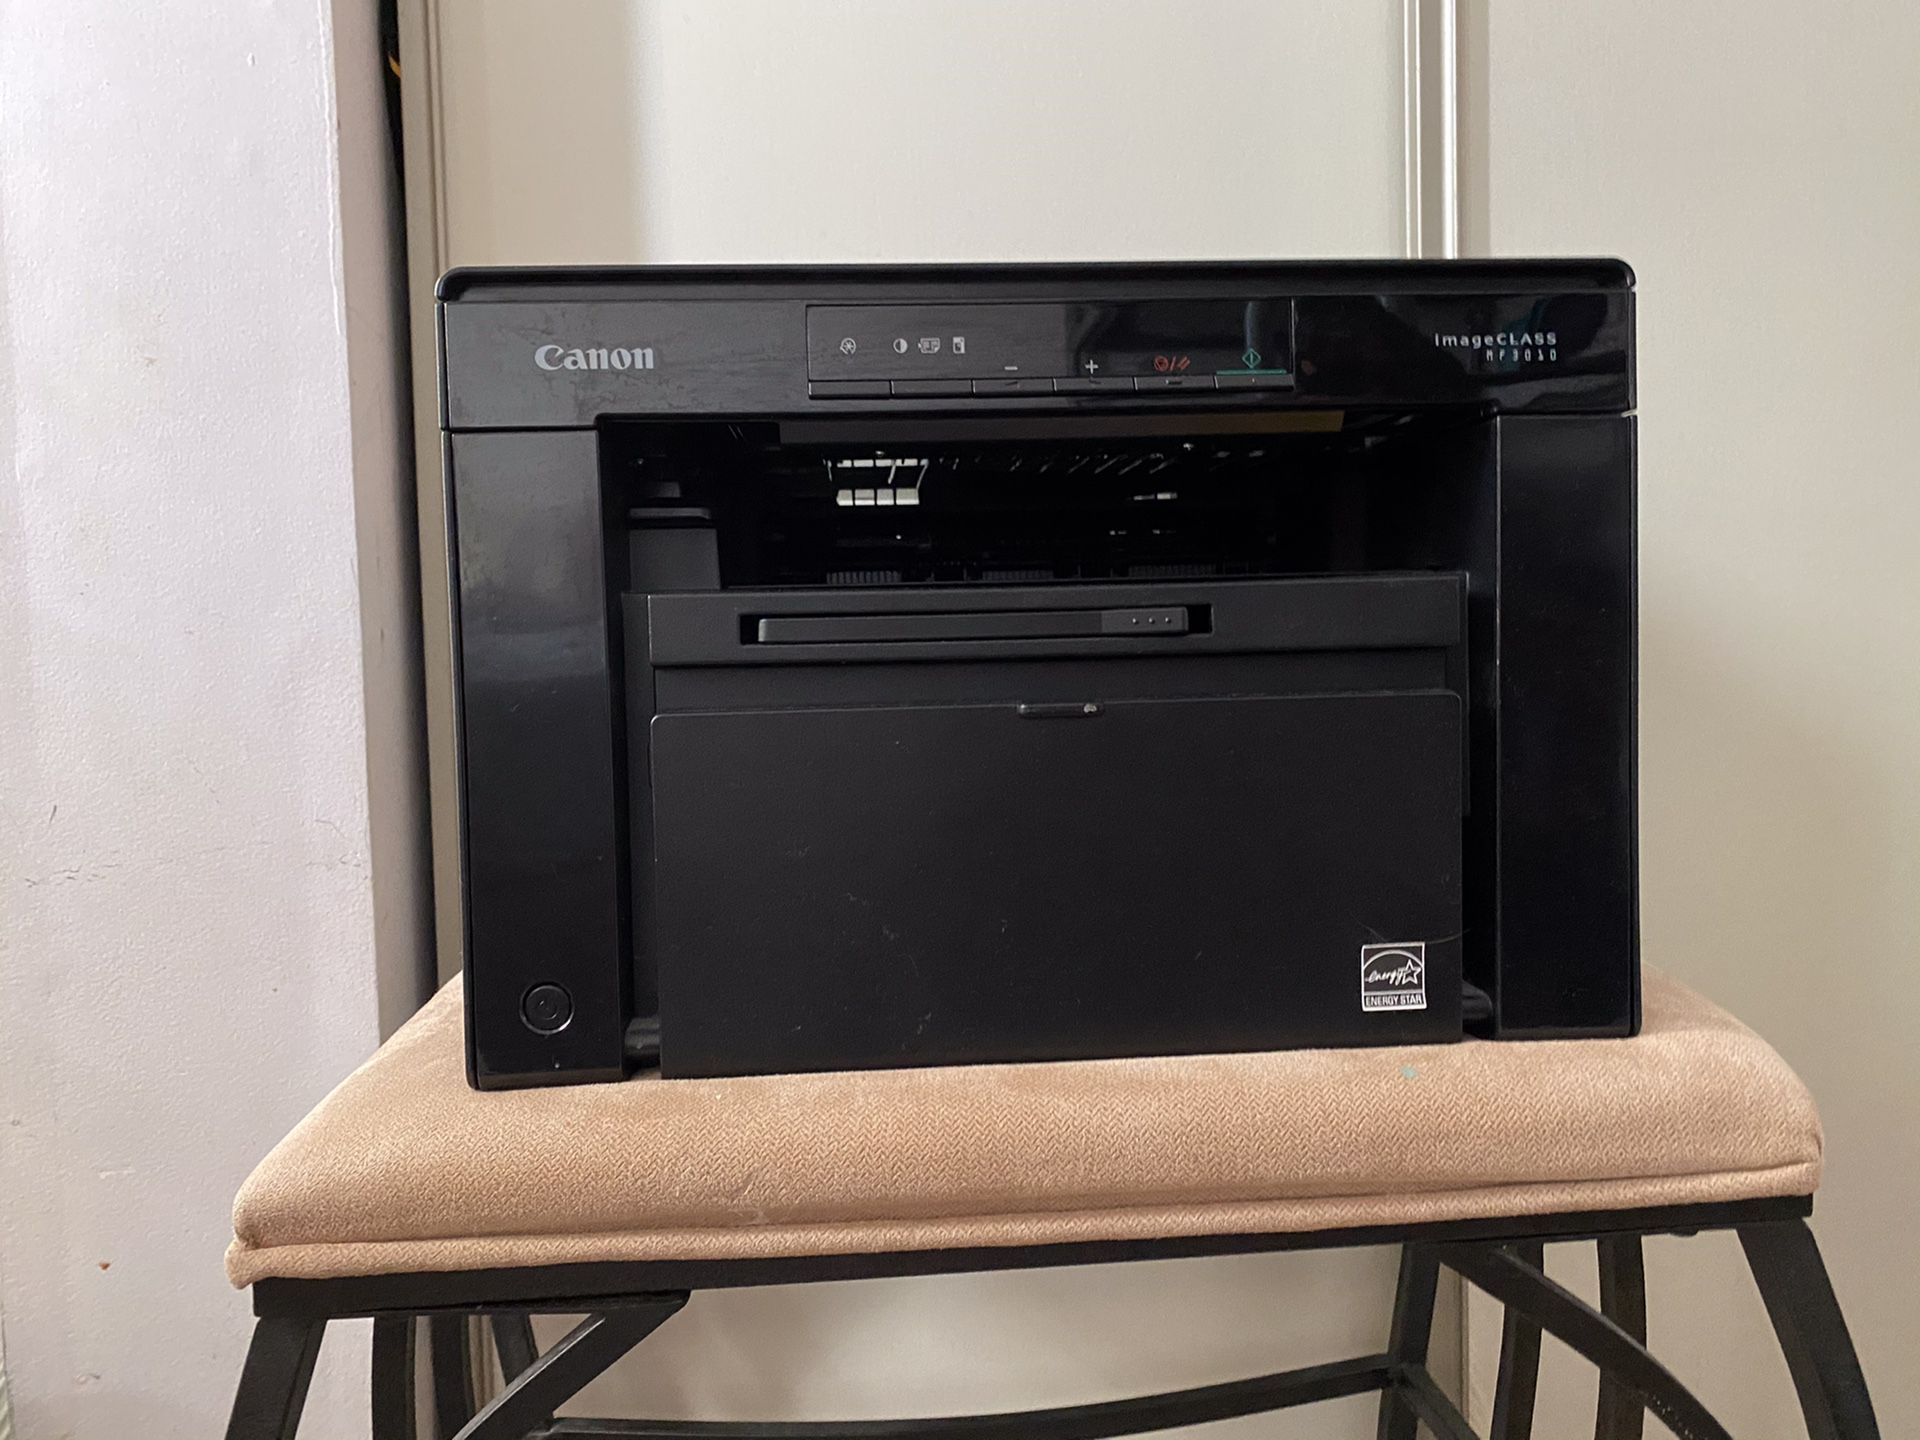 Cannon Laser Printer All In One